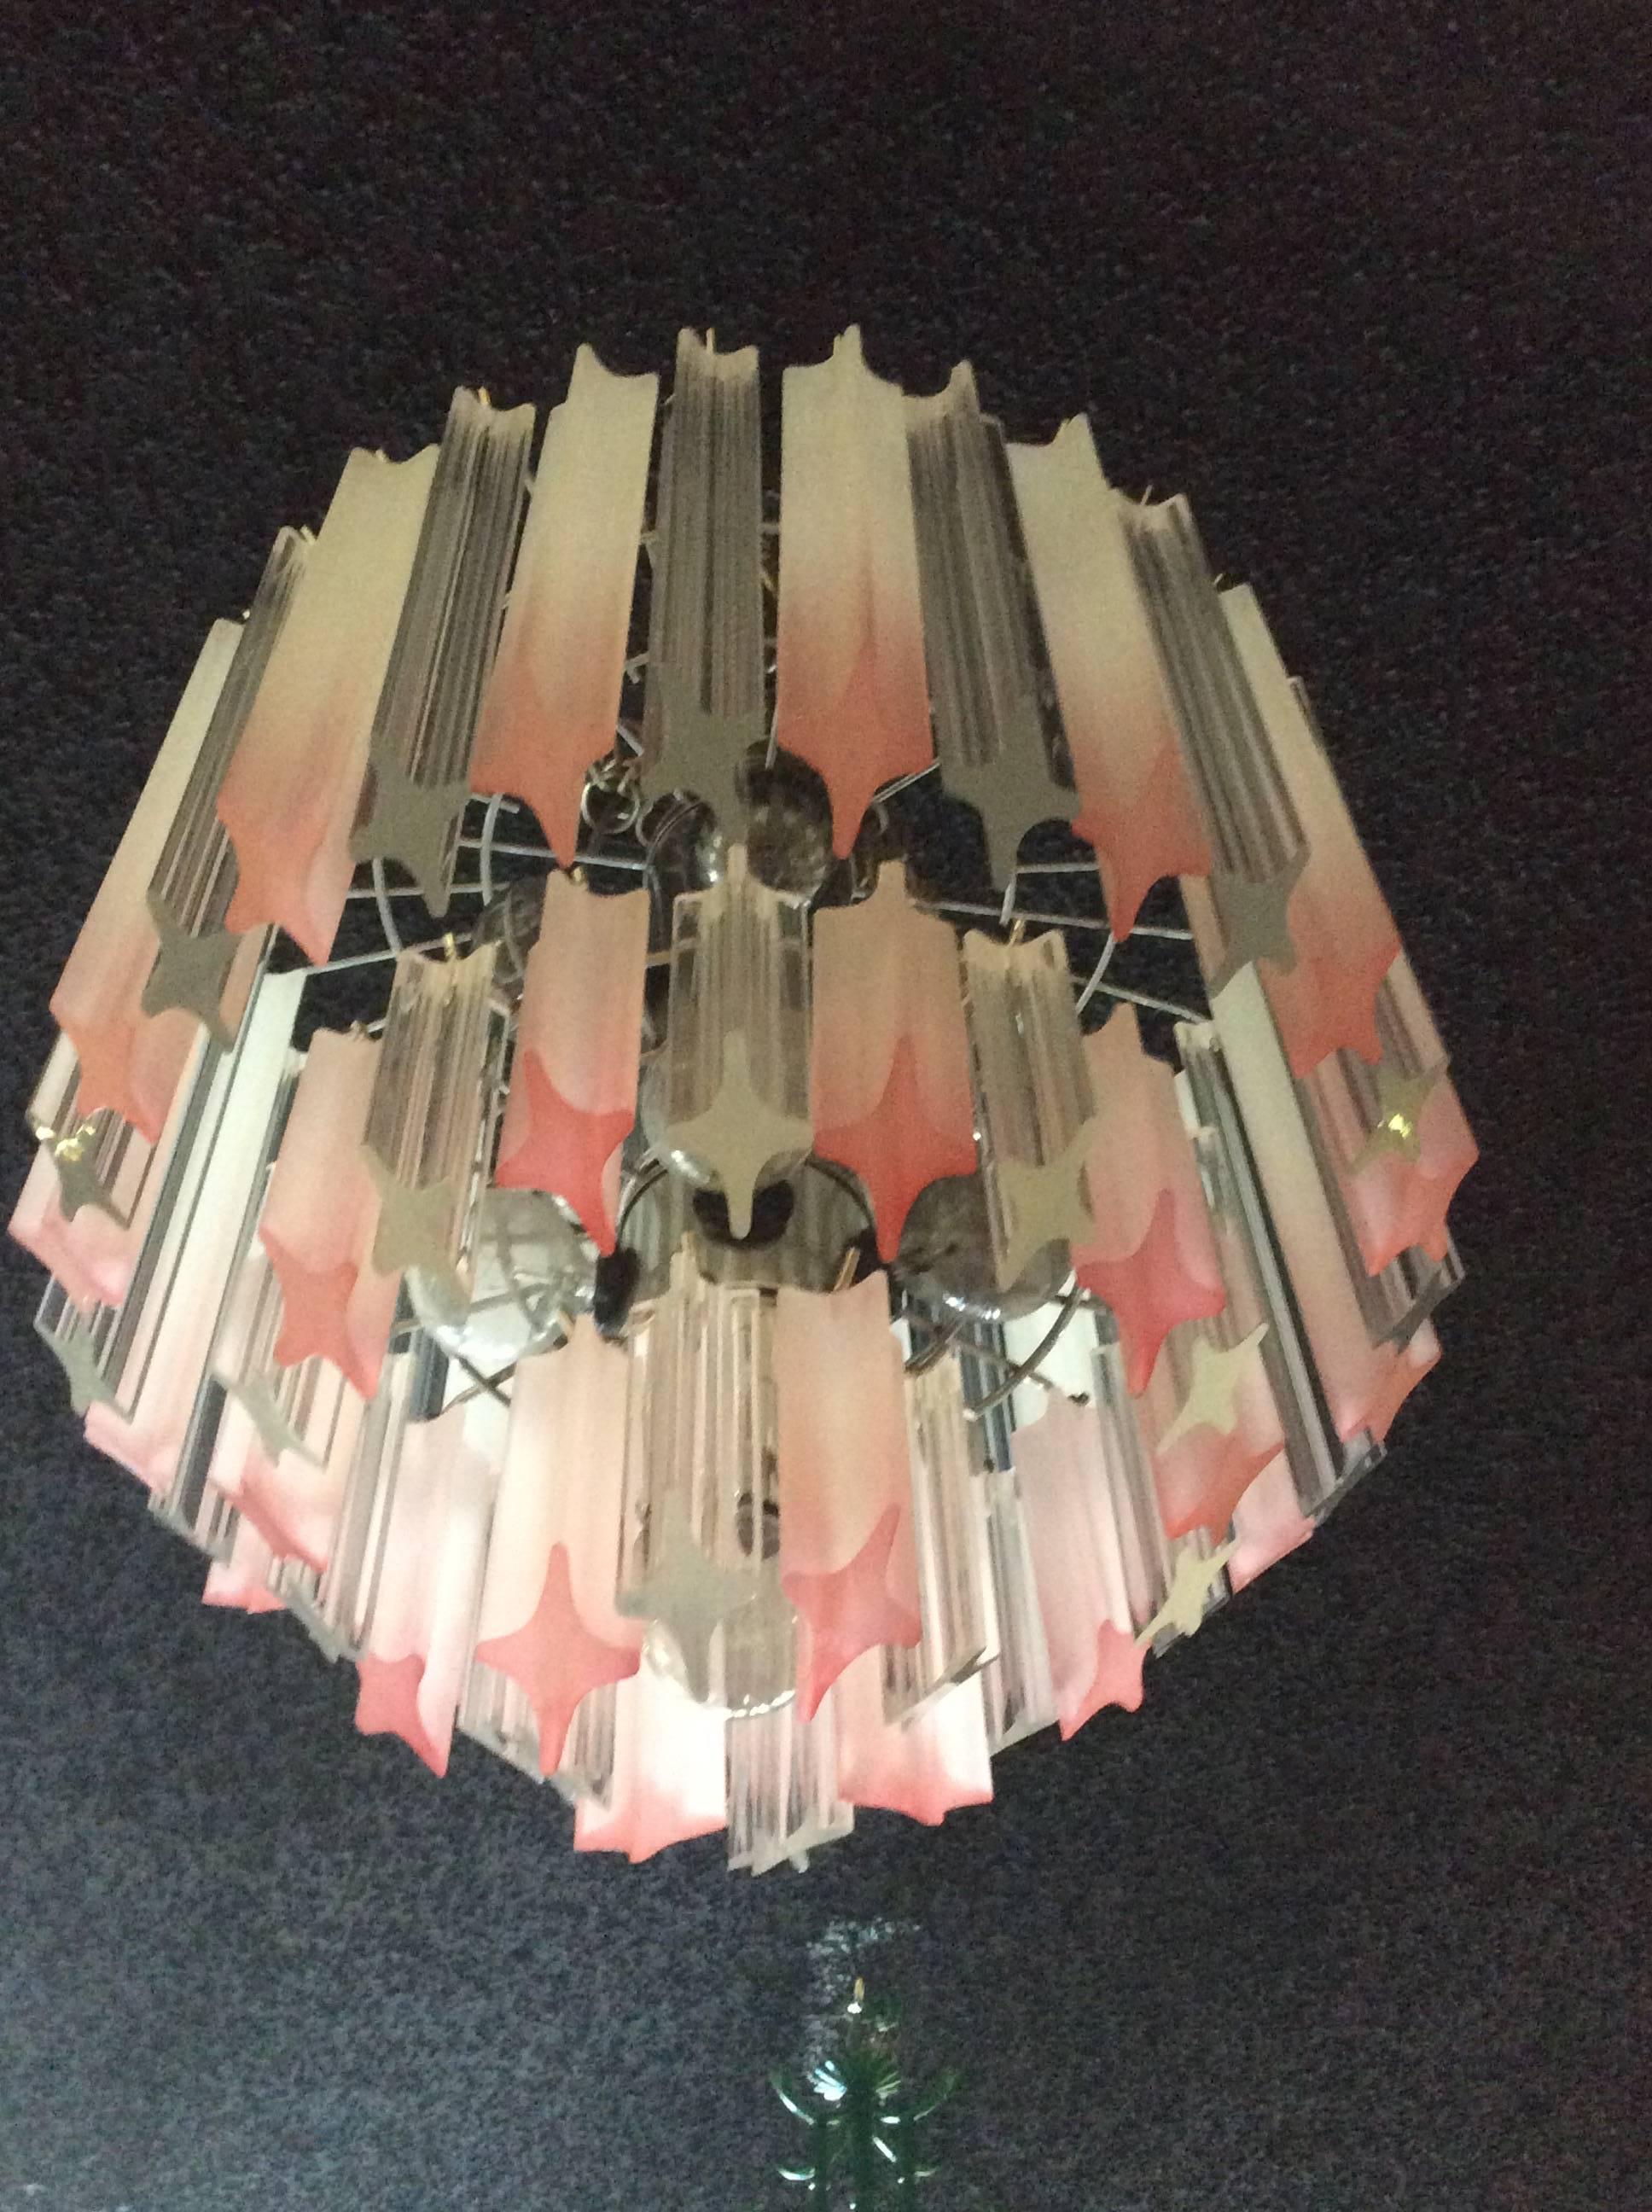 Perfect for a babies nursery, little girls room, big girls room or for that Palm Beach Lily Pulitzer look this pink vintage Hollywood Palm Beach Regency Lucite chandelier will be the icing on the cake! Three-tier with chrome cage. Tested, working